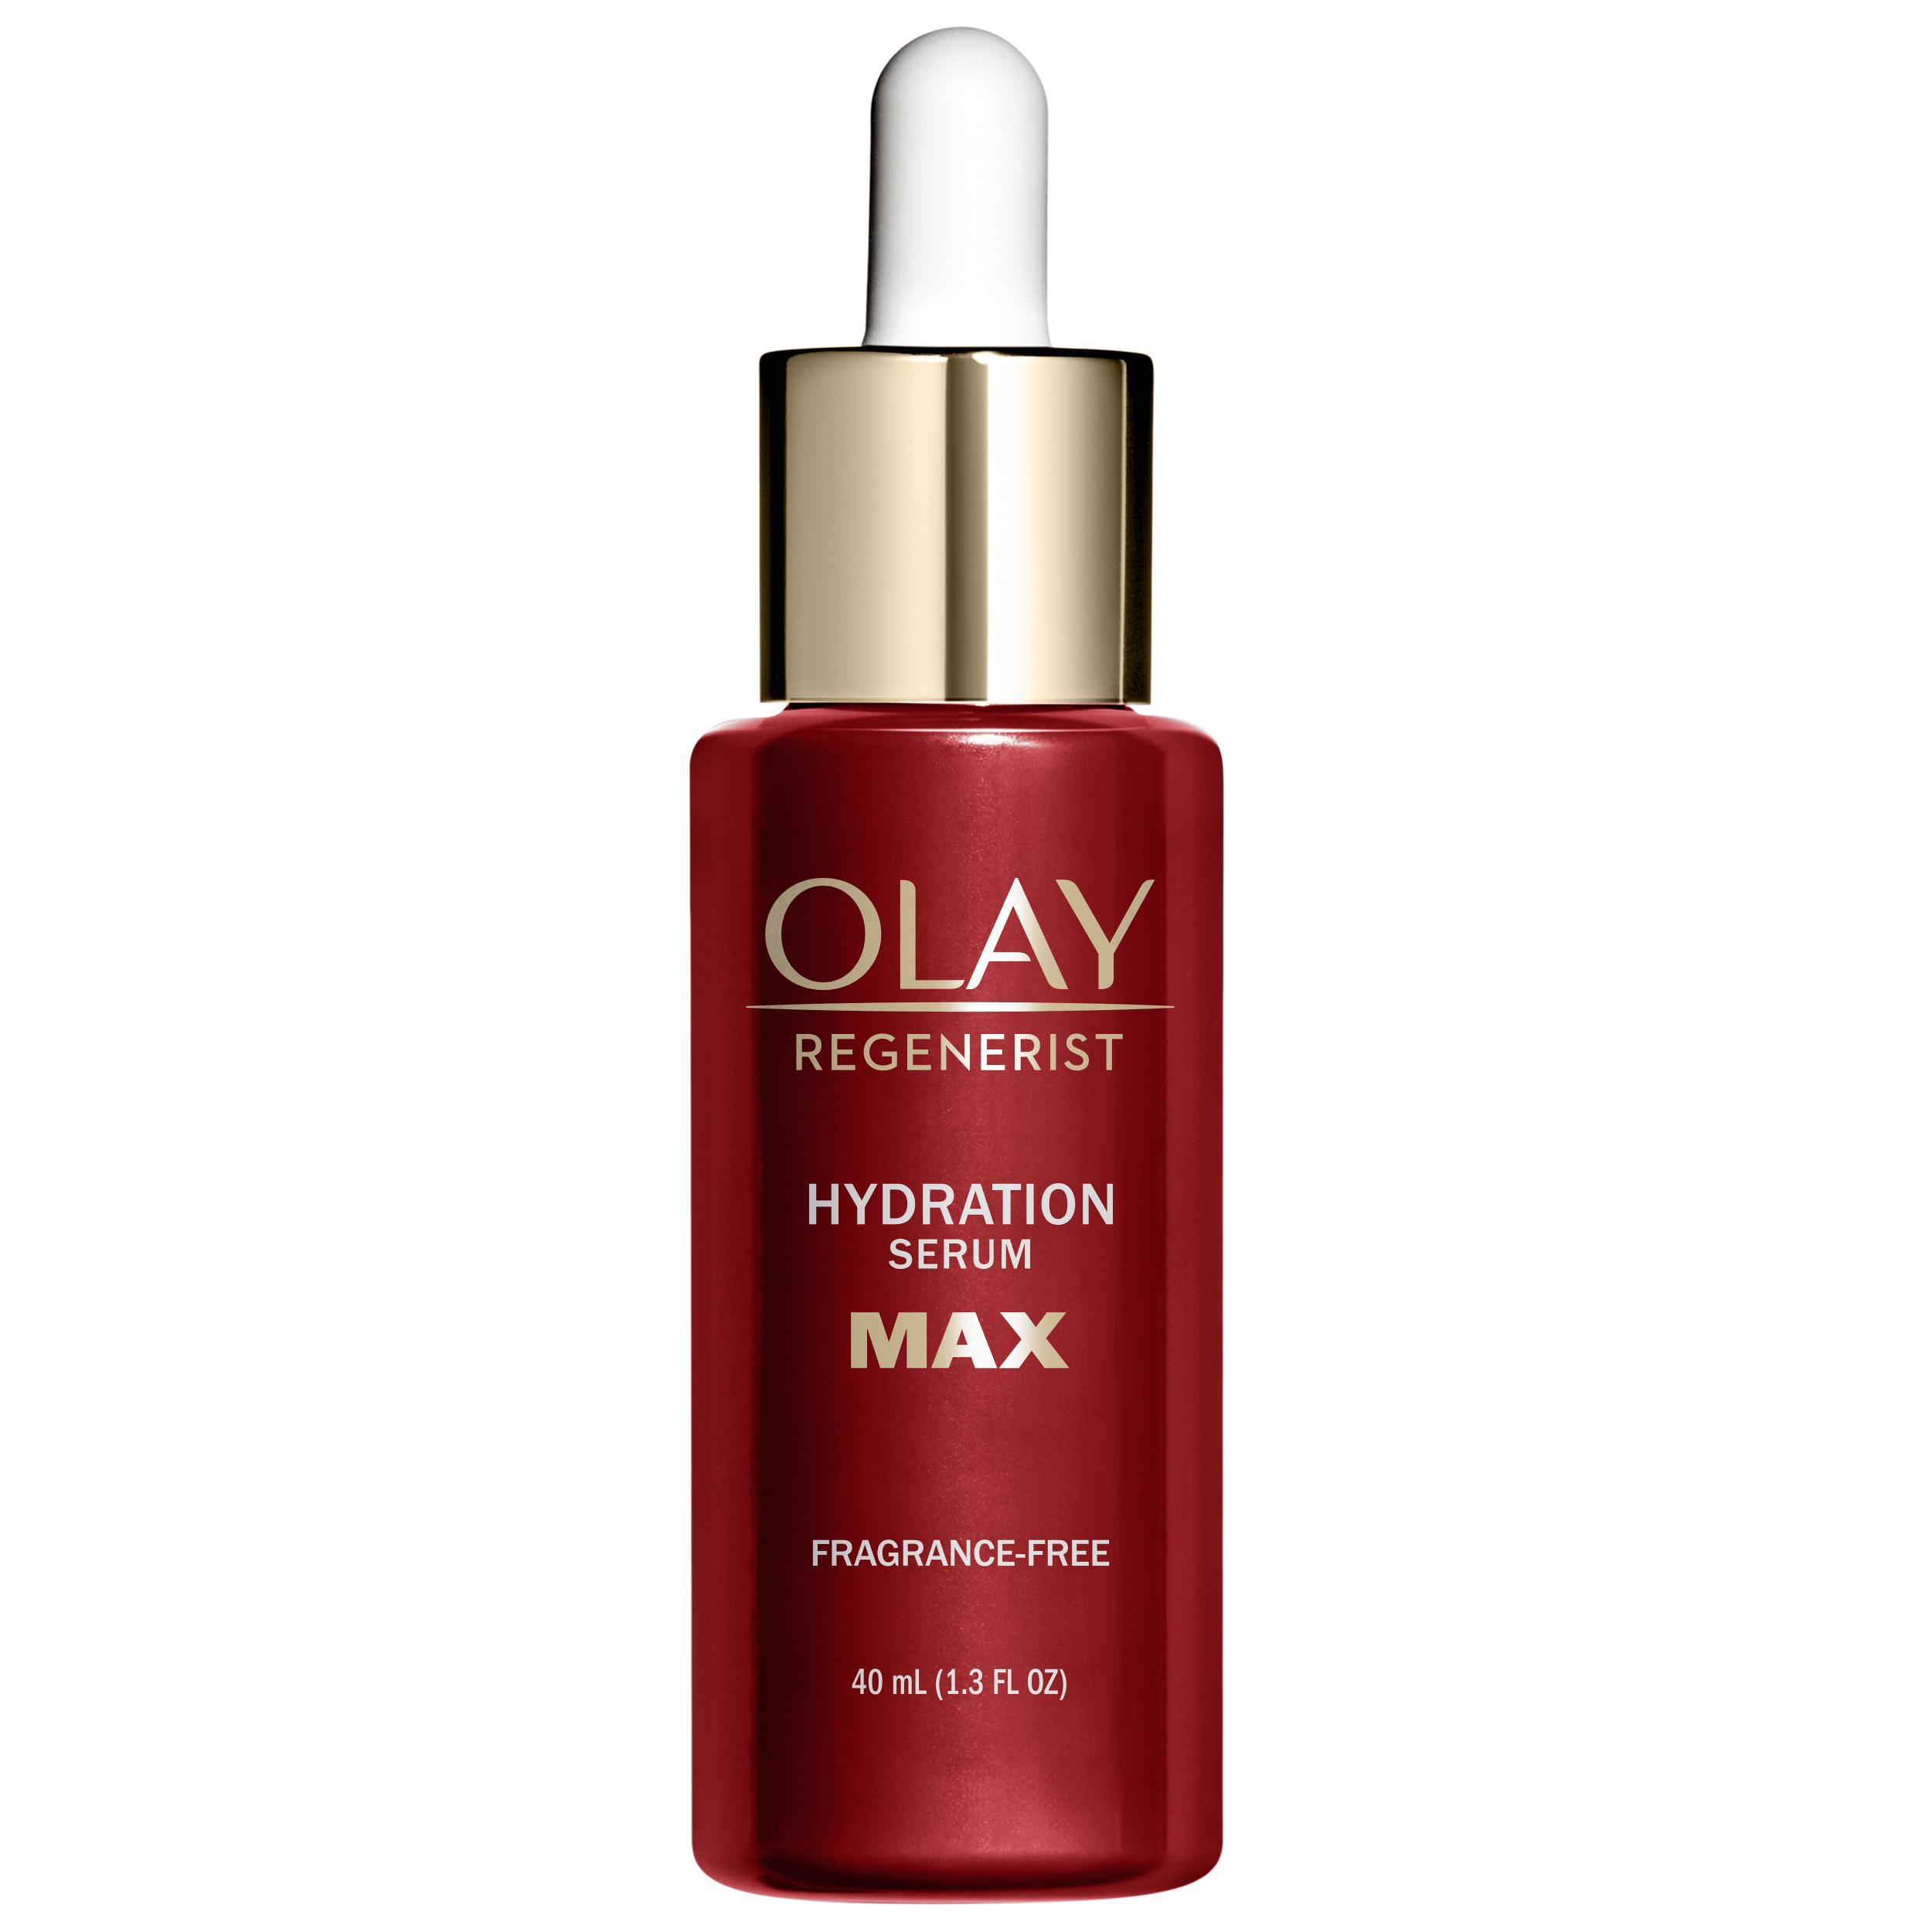 Olay Regenerist MAX Hydration Serum with Hyaluronic Acid for $15.49 Shipped